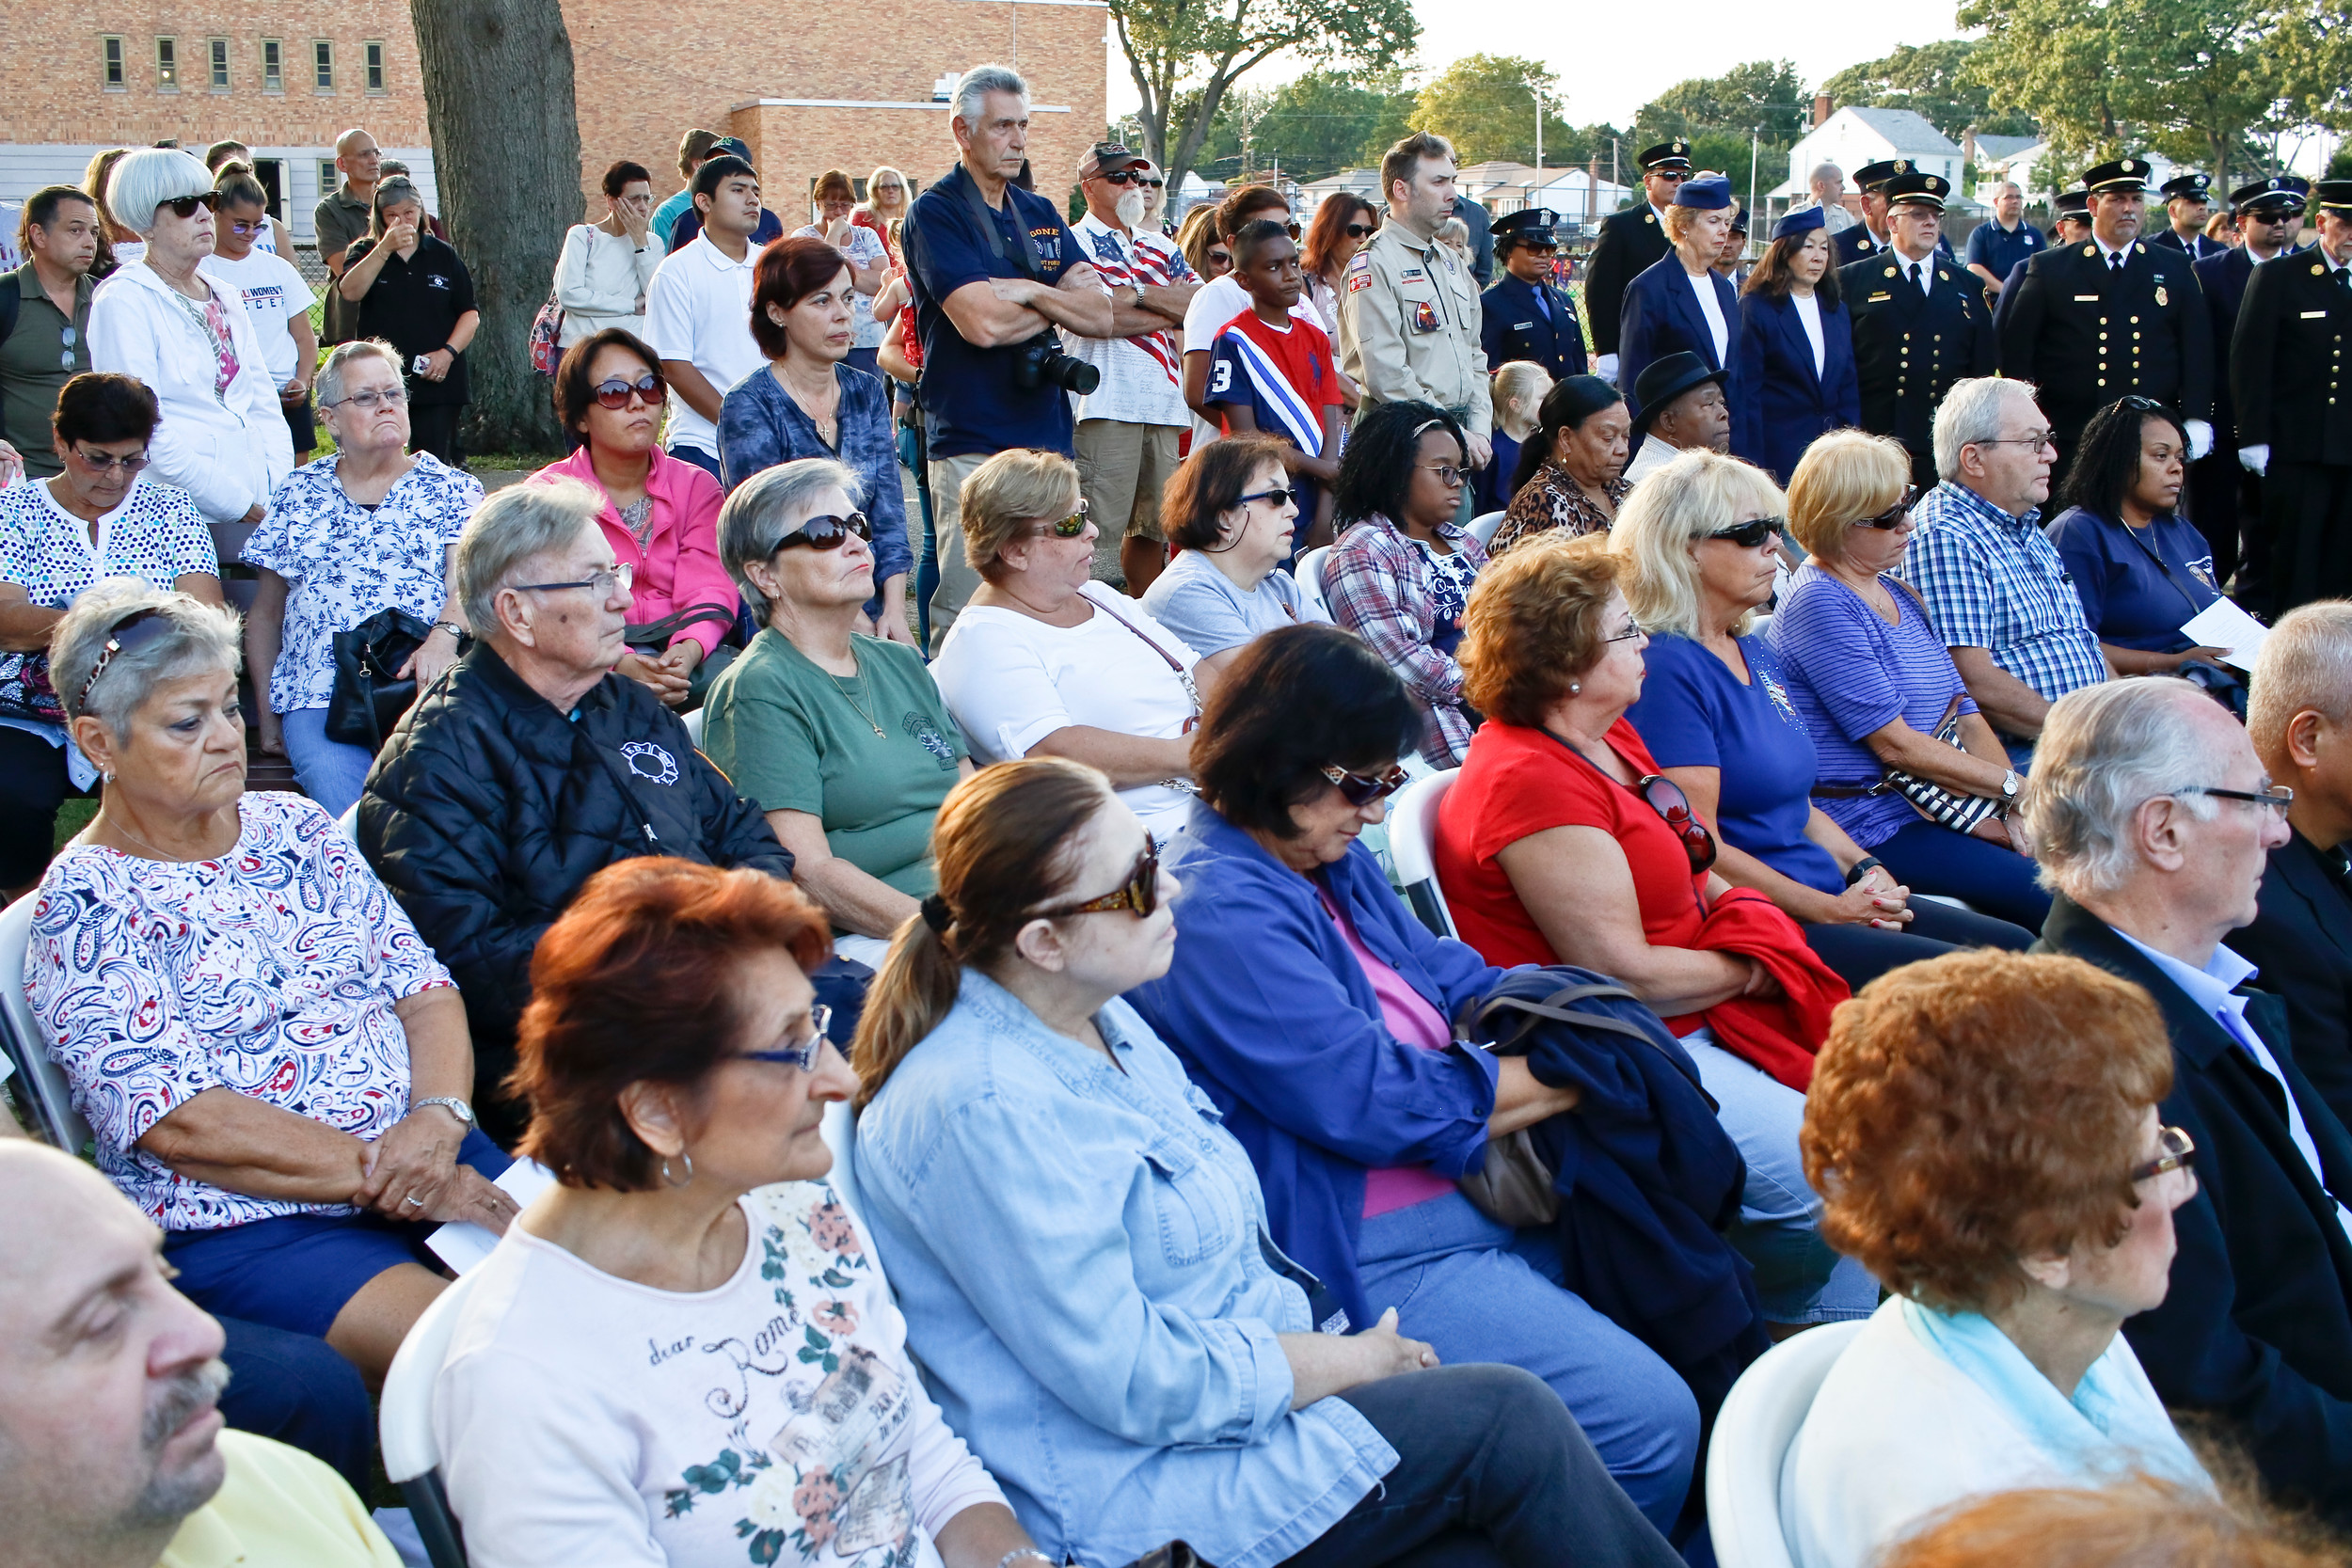 Hundreds of residents gathered for the annual ceremony at Hendrickson Park. Six years ago, the village added a memorial site dedicated to the attacks, with a steel beam from the destroyed World Trade Center positioned on two cement columns that point toward 1 World Trade. In 2015, the village acquired two "Survivor Tree" saplings that grew out of the charred trunk of a Callery pear tree that was uncovered under the rubble of the twin towers.